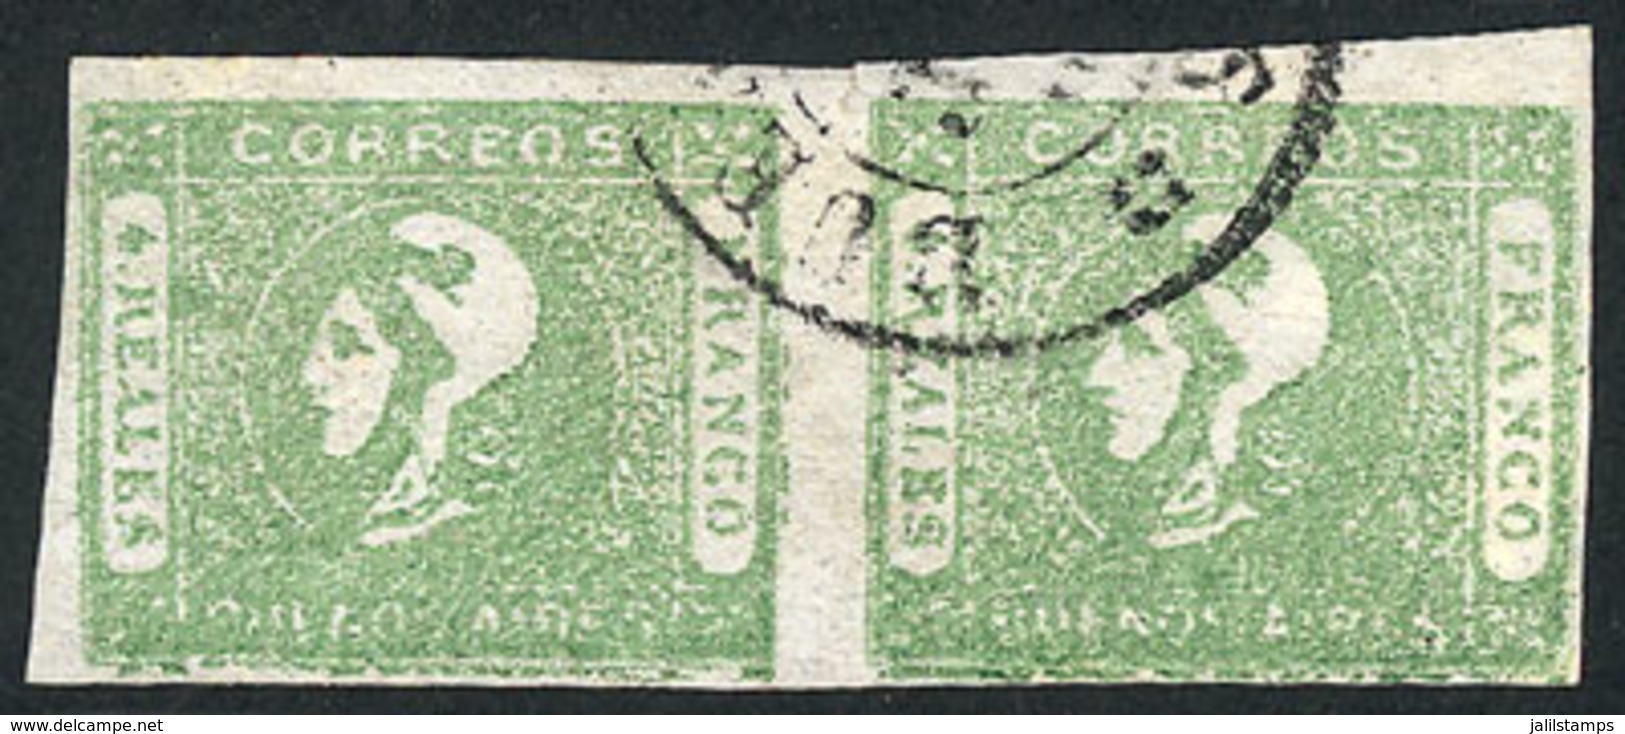 ARGENTINA: GJ.16, 4R. Worn Impression, Rare "bright" Yellow-green Color, Beautiful Horizontal Pair Of Four Margins, Used - Buenos Aires (1858-1864)